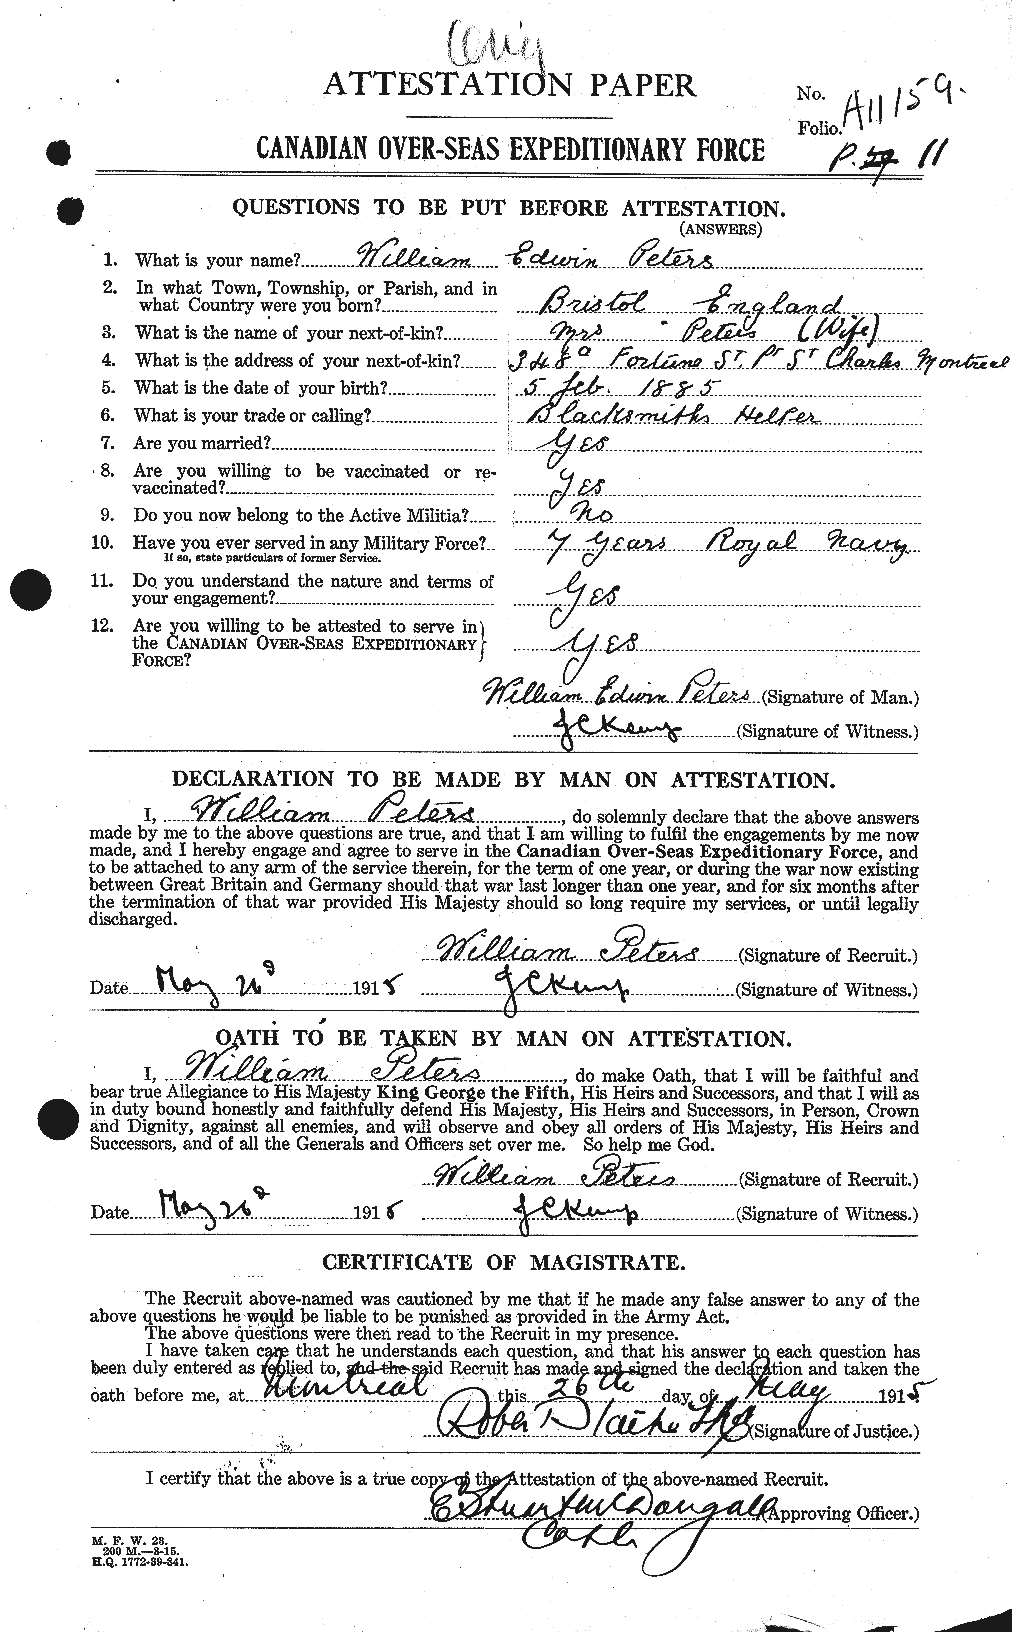 Personnel Records of the First World War - CEF 575655a